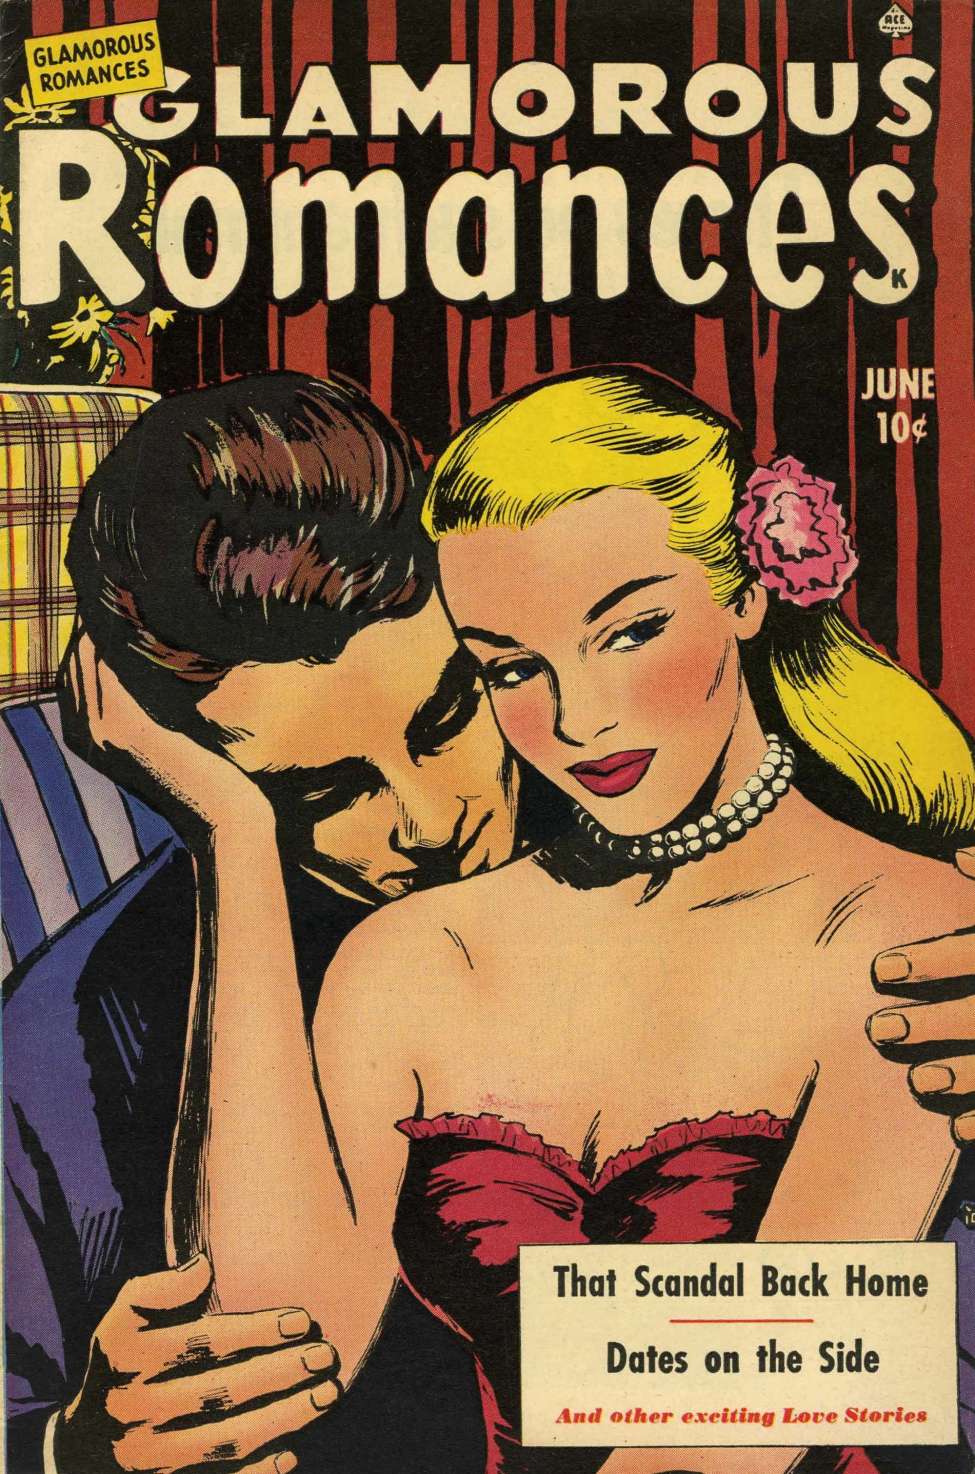 Book Cover For Glamorous Romances 52 - Version 1